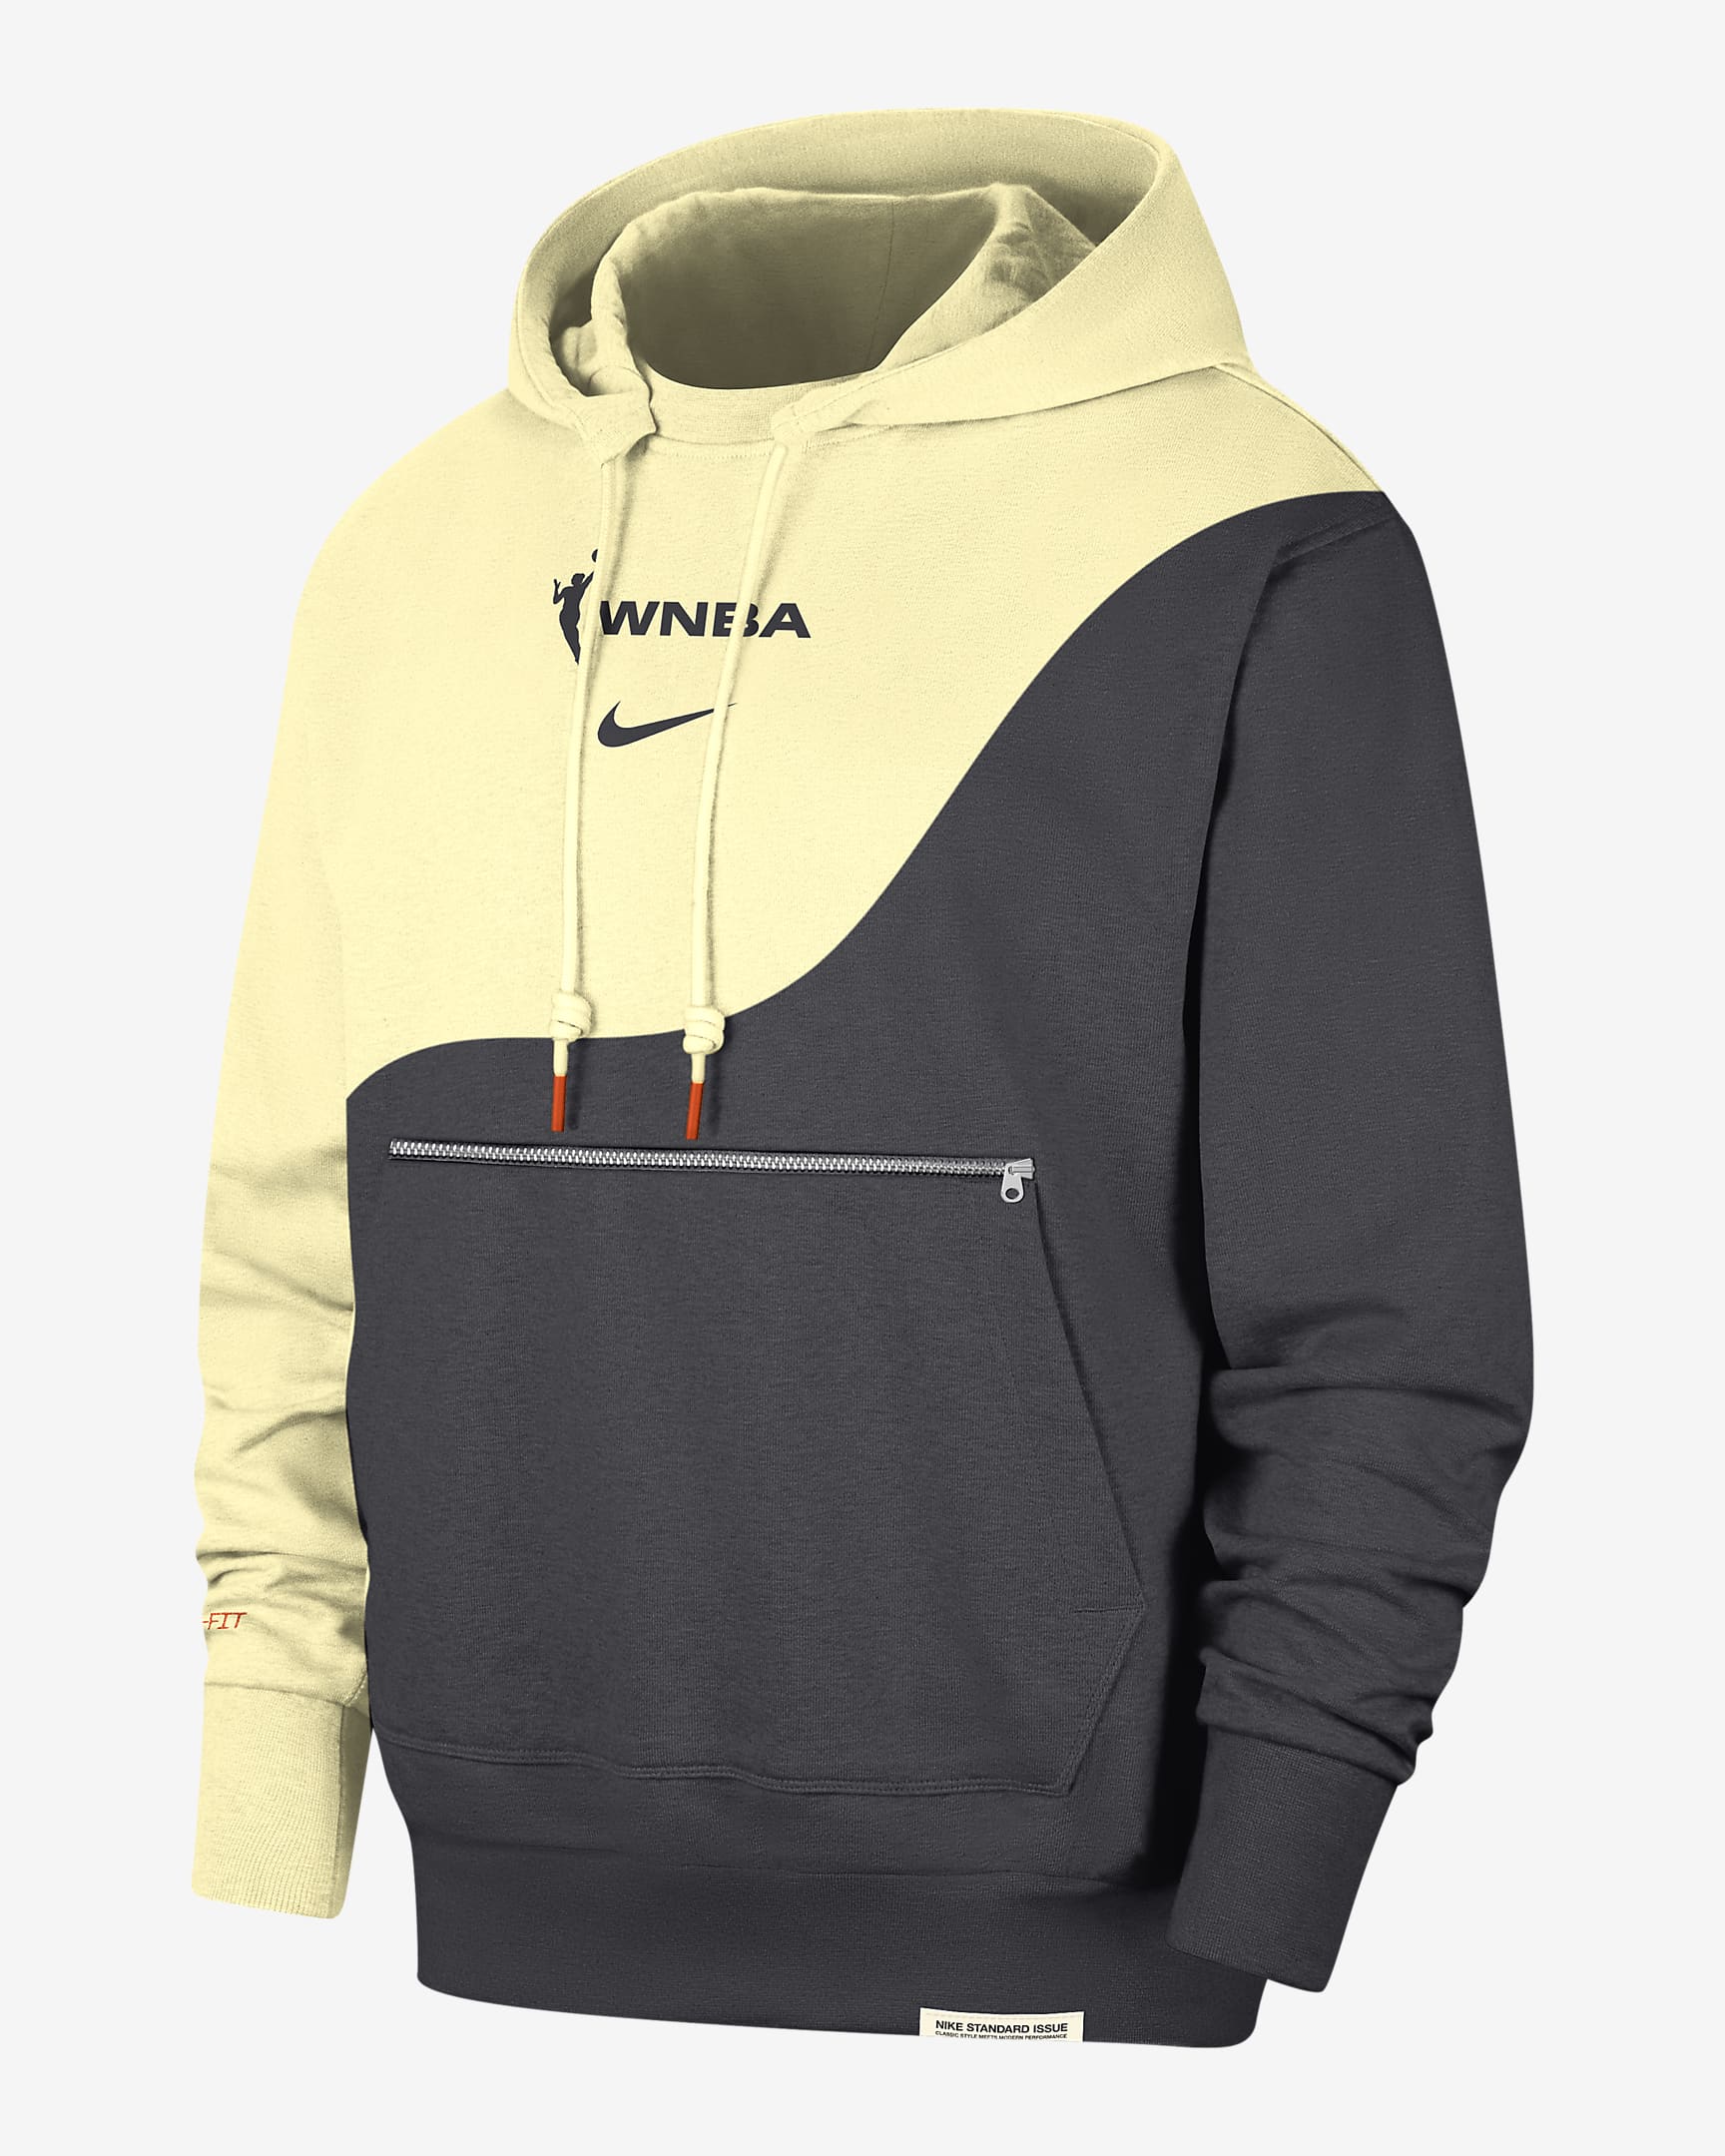 Team 13 Standard Issue Nike WNBA Basketball Hoodie - Alabaster/Anthracite/Pale Ivory/Anthracite